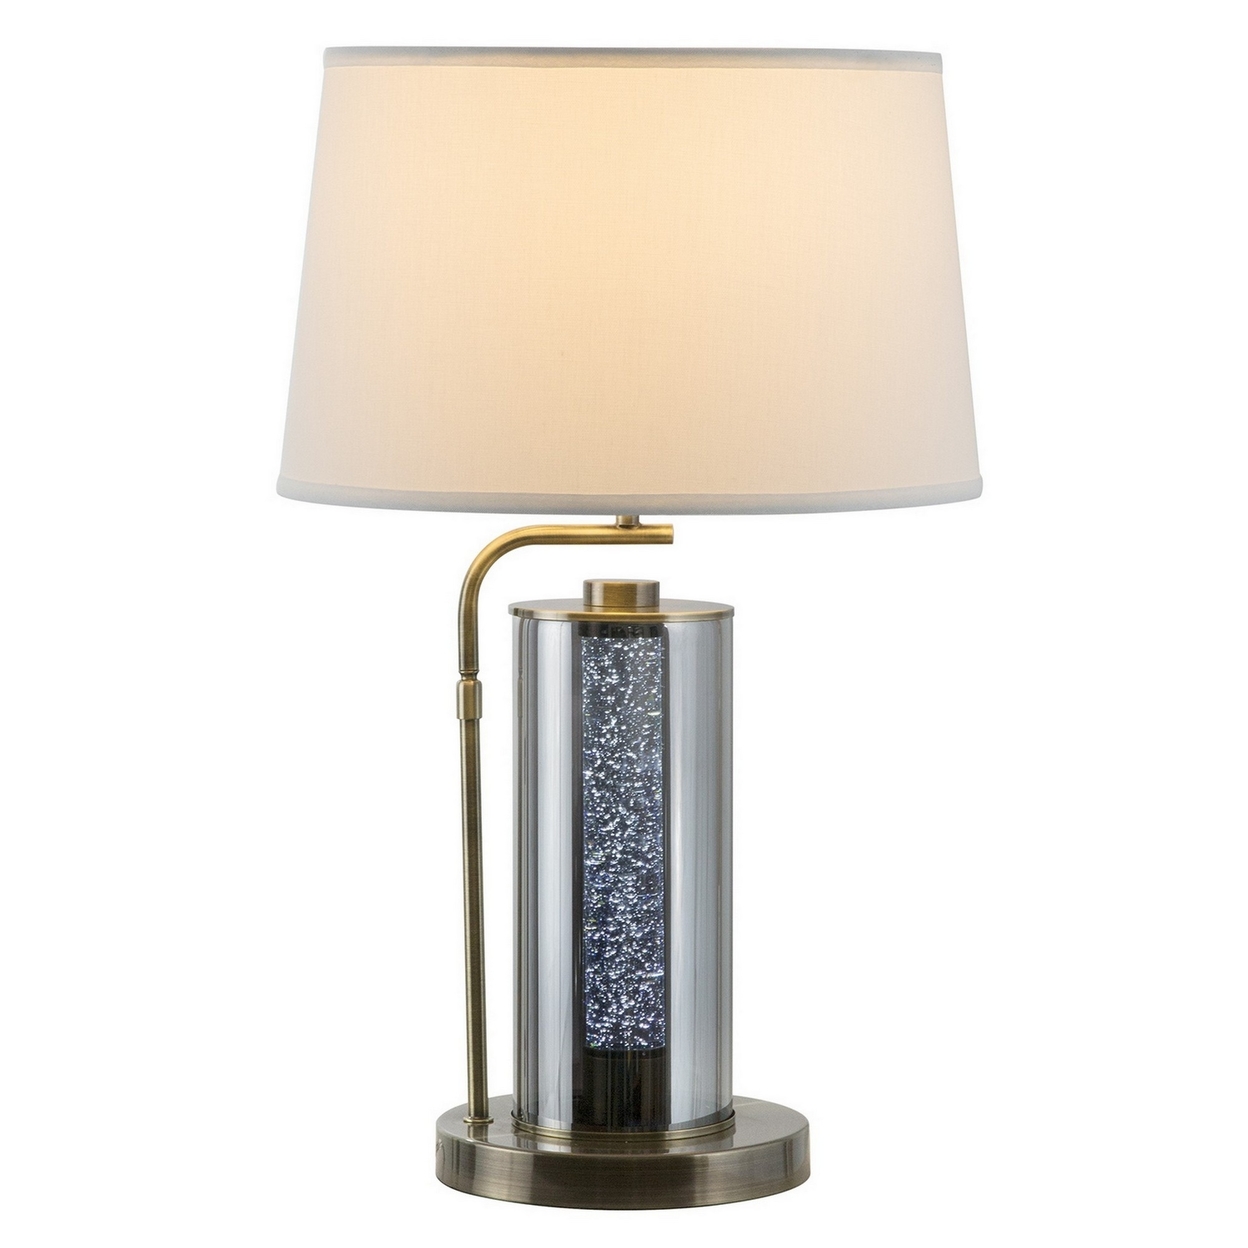 29 Inch Table Lamp With LED Night Light Stand, Glass, Antique Brass -Saltoro Sherpi